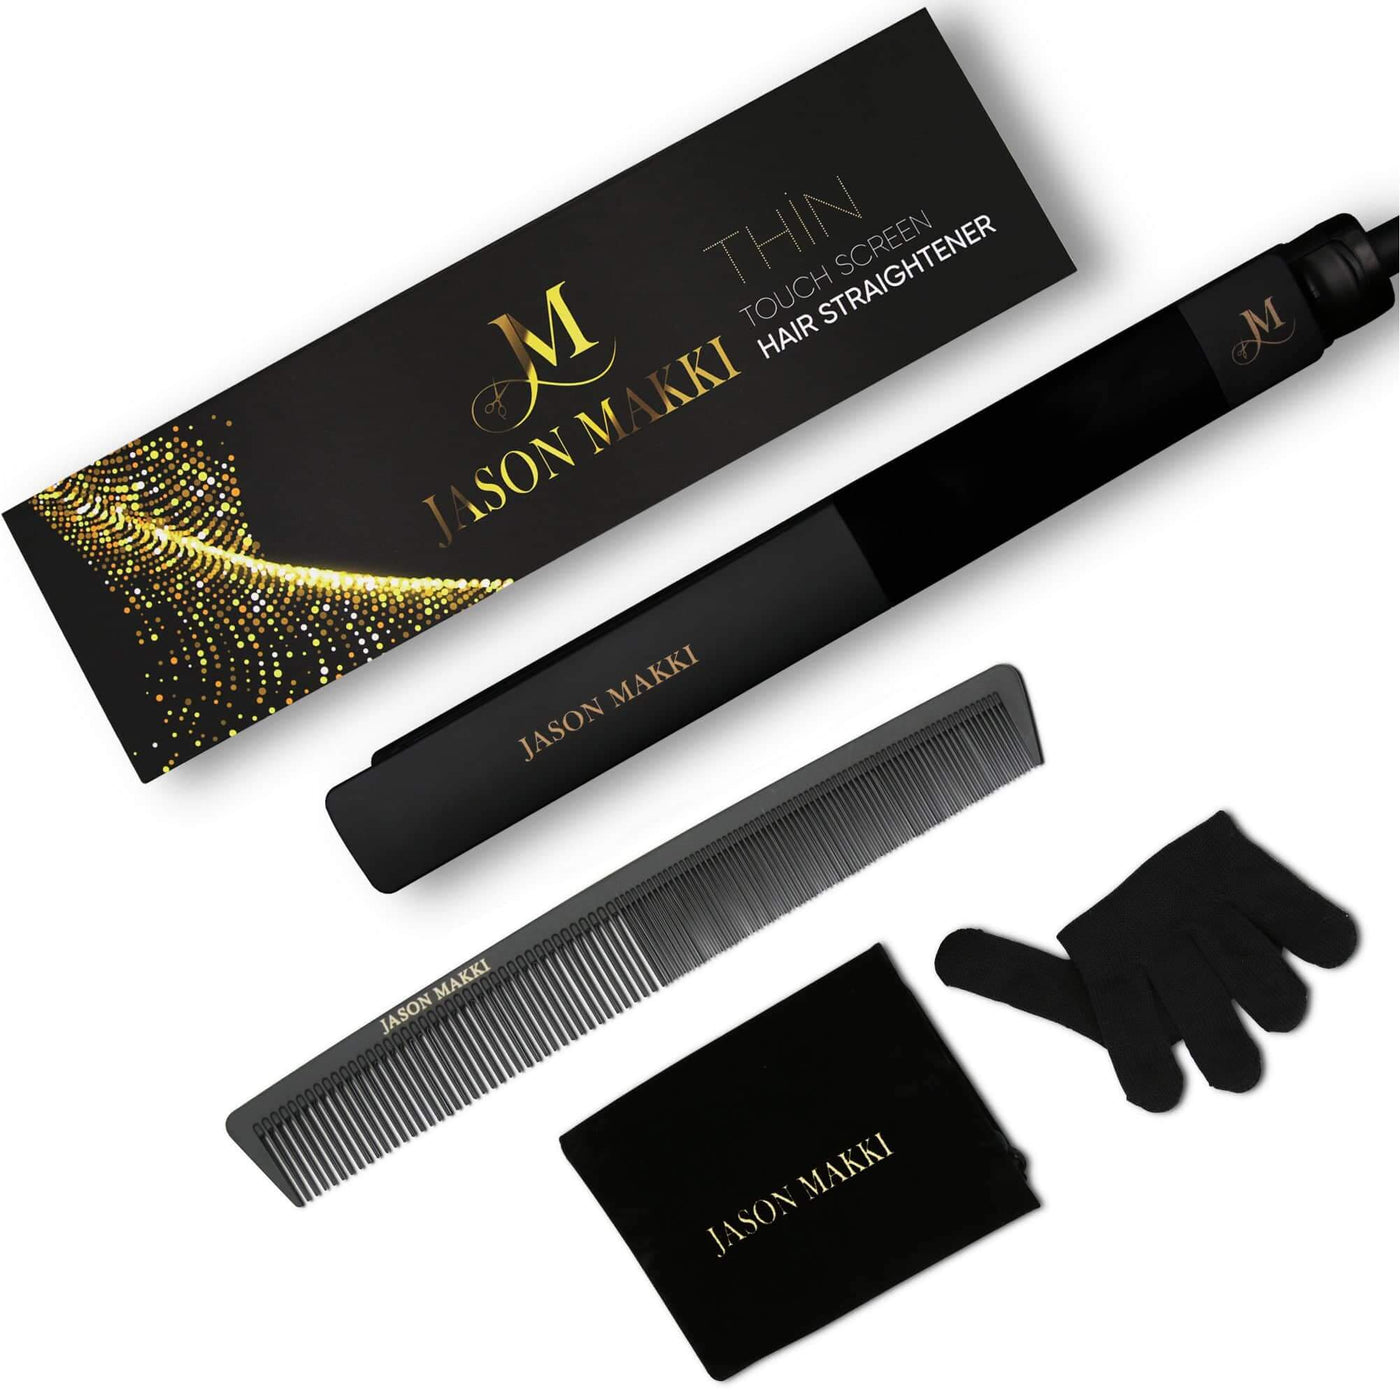 Jason Makki Hair Straightener with heat resistant comb, black gloves and black travel pouch.